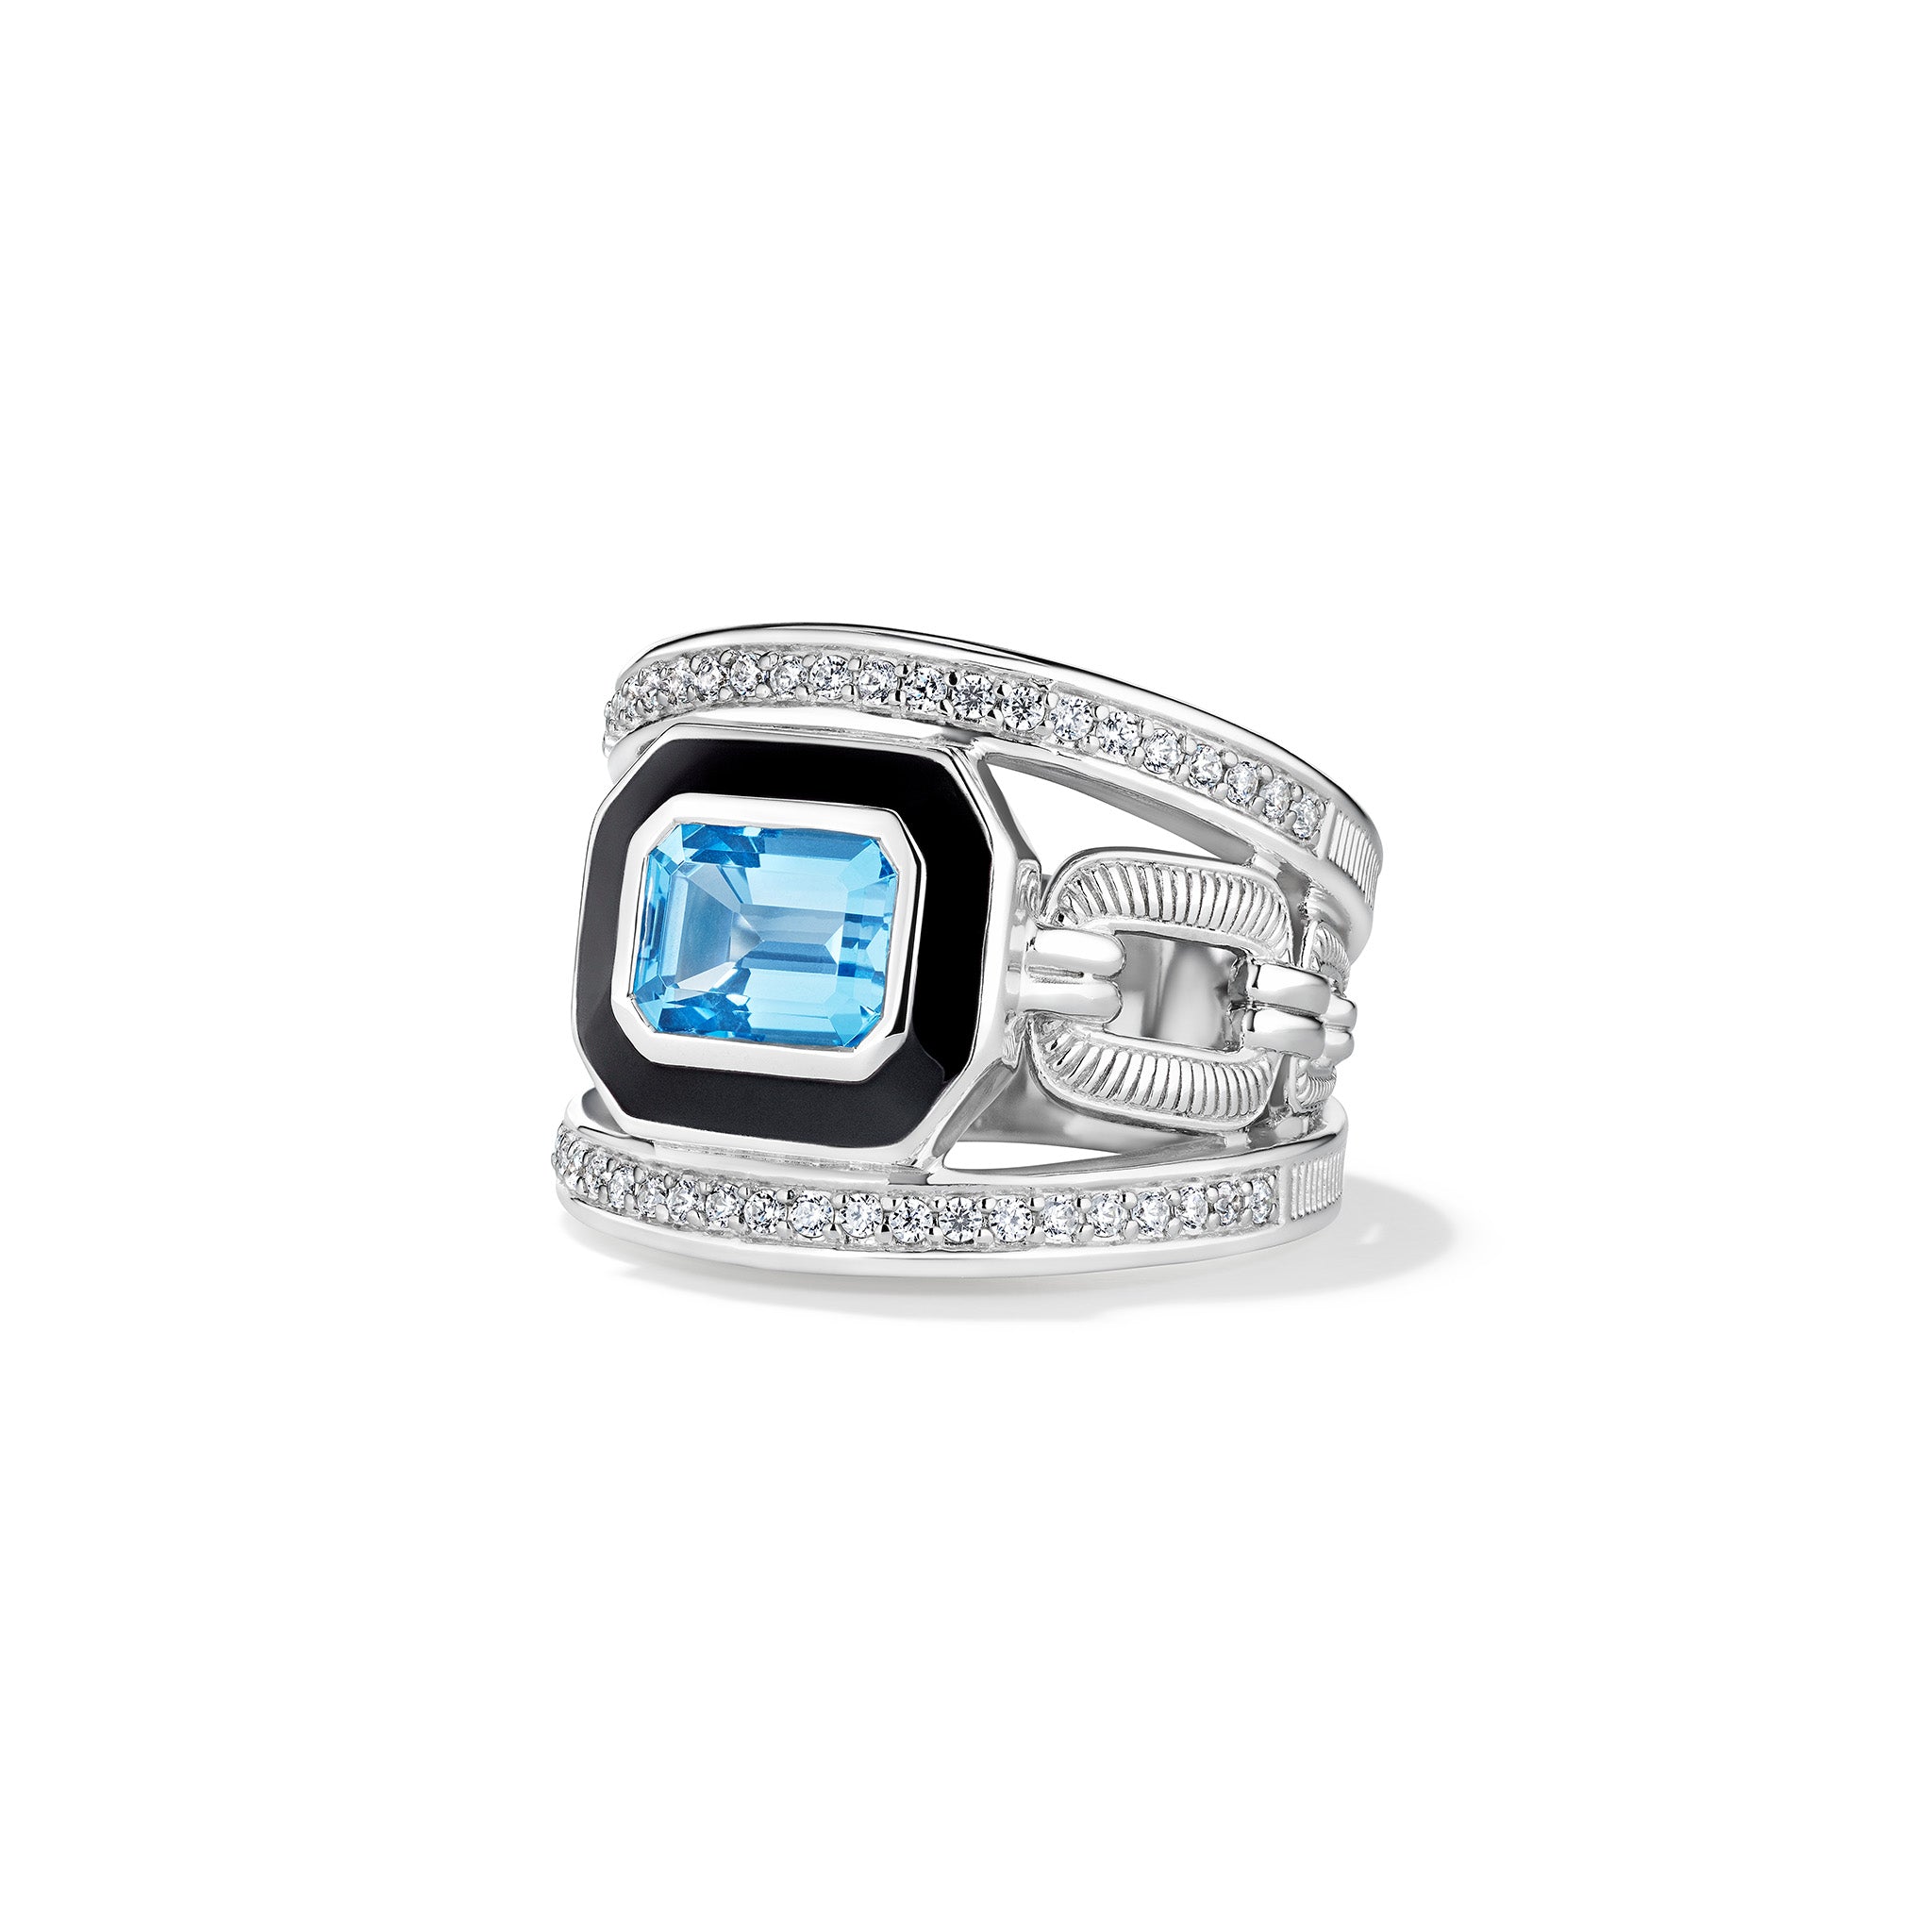 Adrienne Band Ring with Enamel, Swiss Blue Topaz and Diamonds